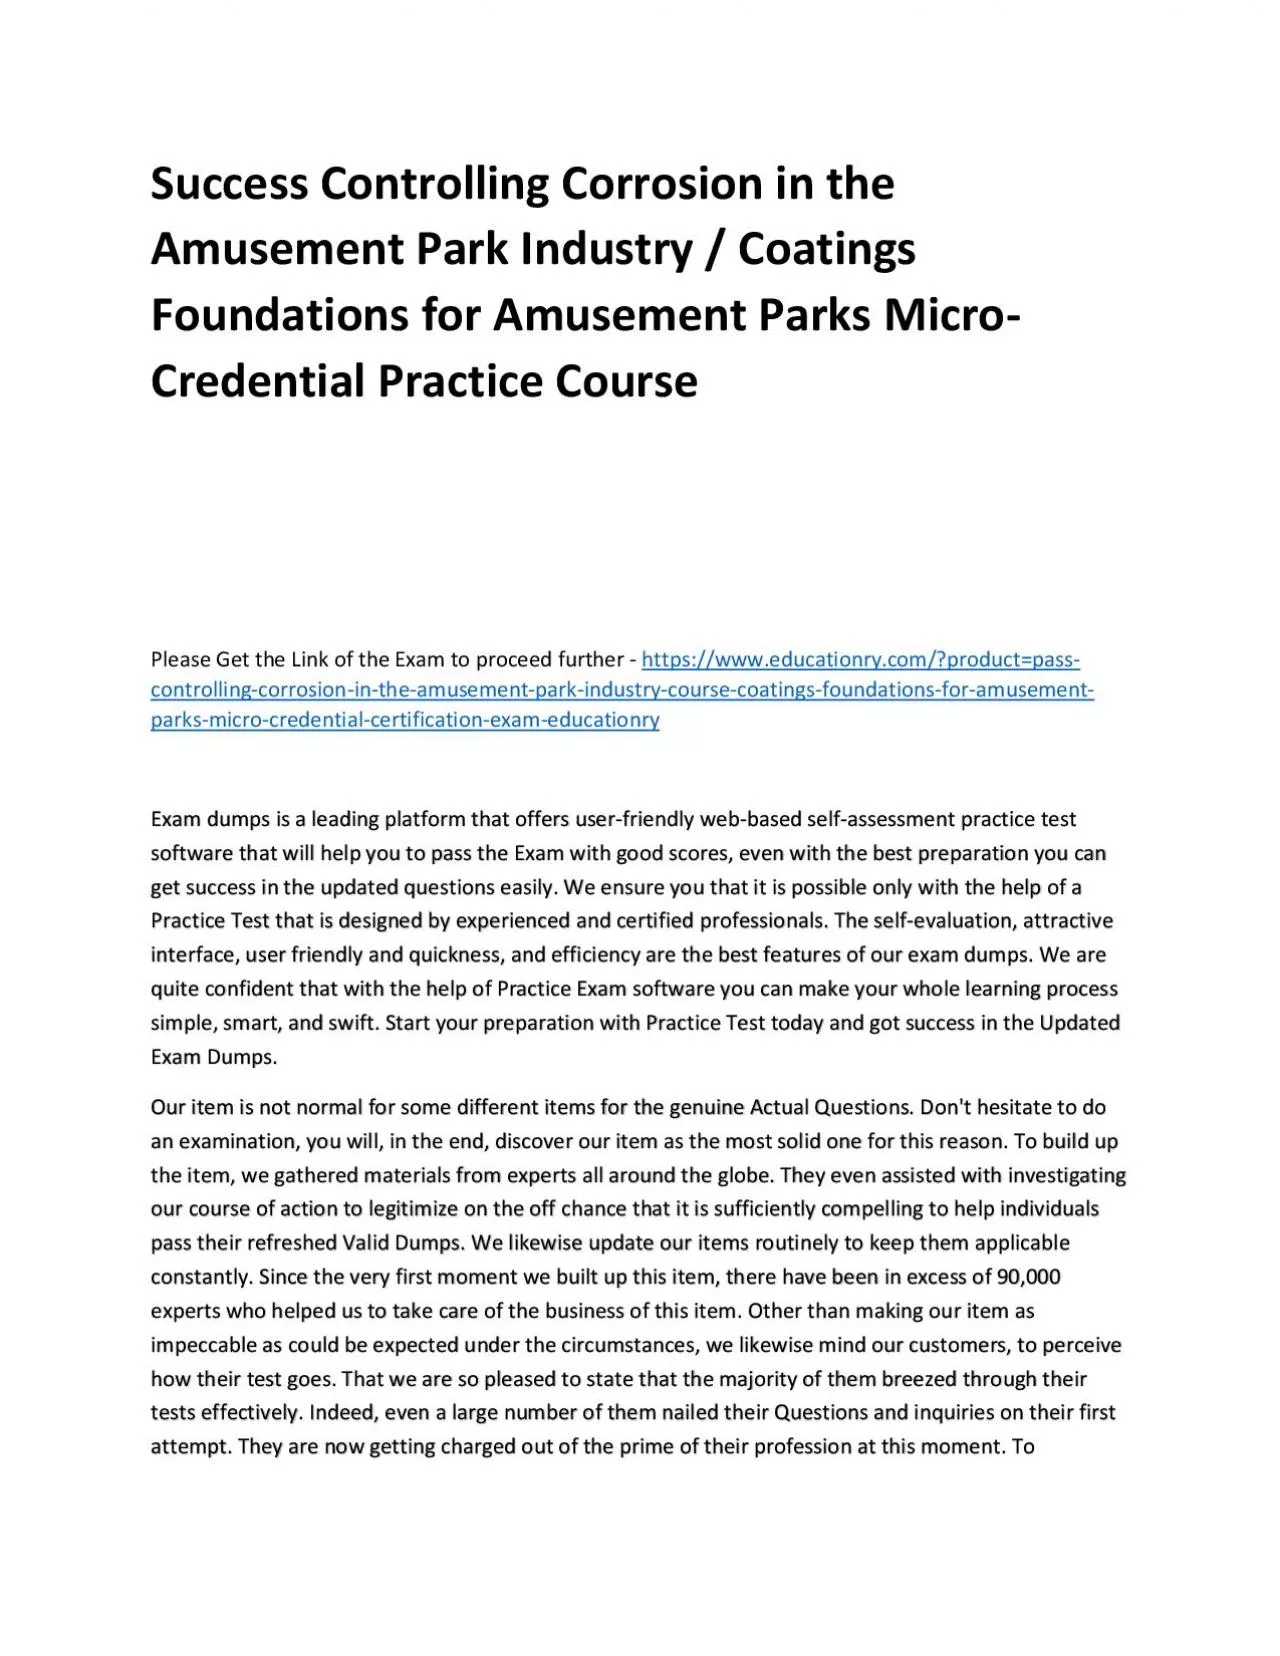 Controlling Corrosion in the Amusement Park Industry Course / Coatings Foundations for